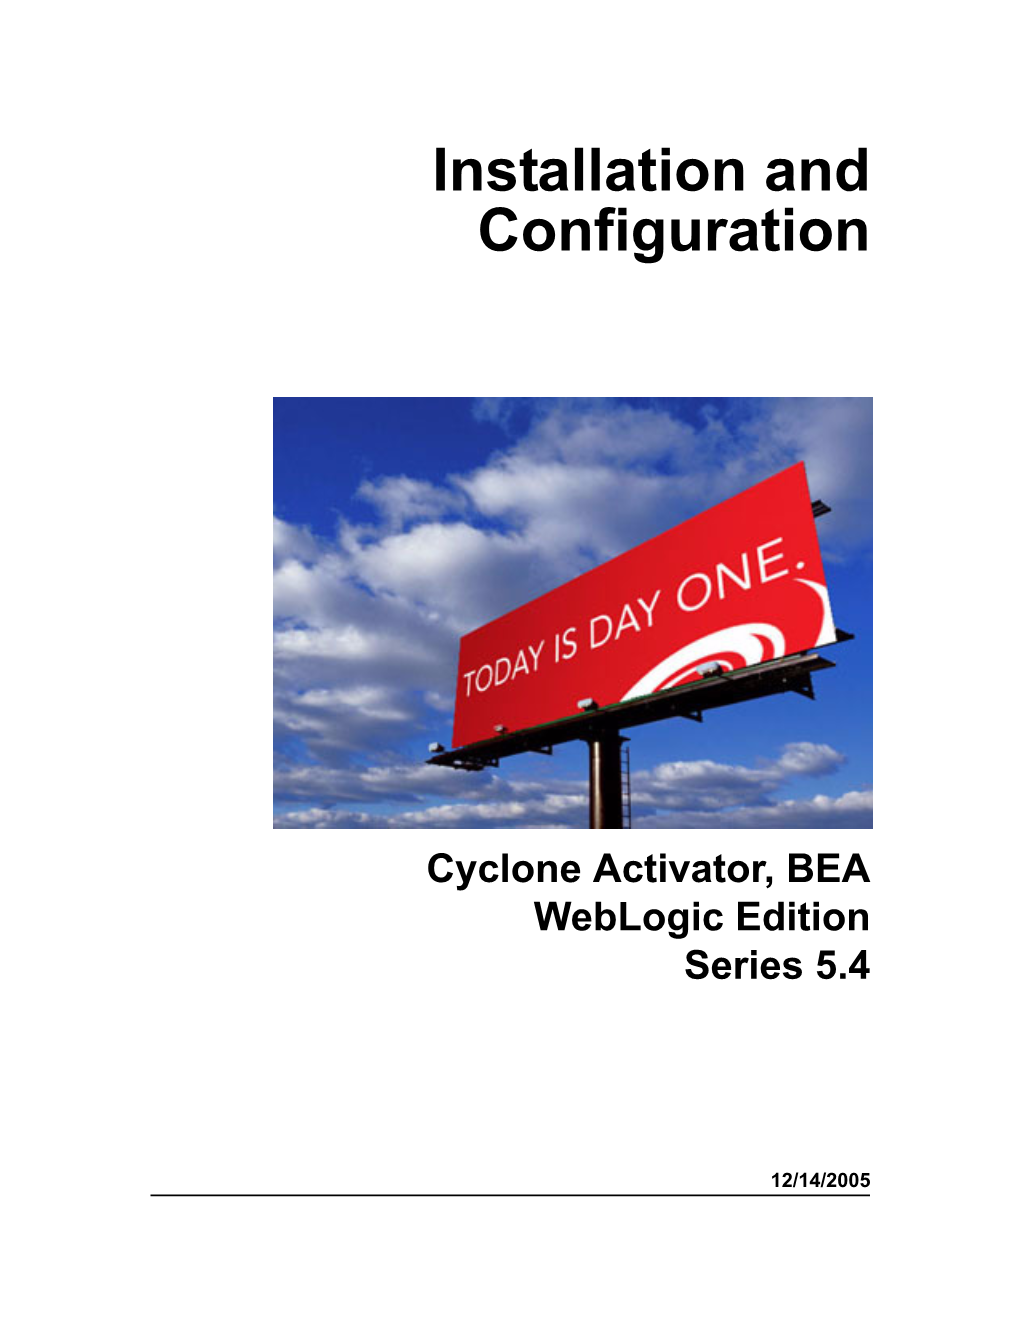 Installation and Configuration Guide